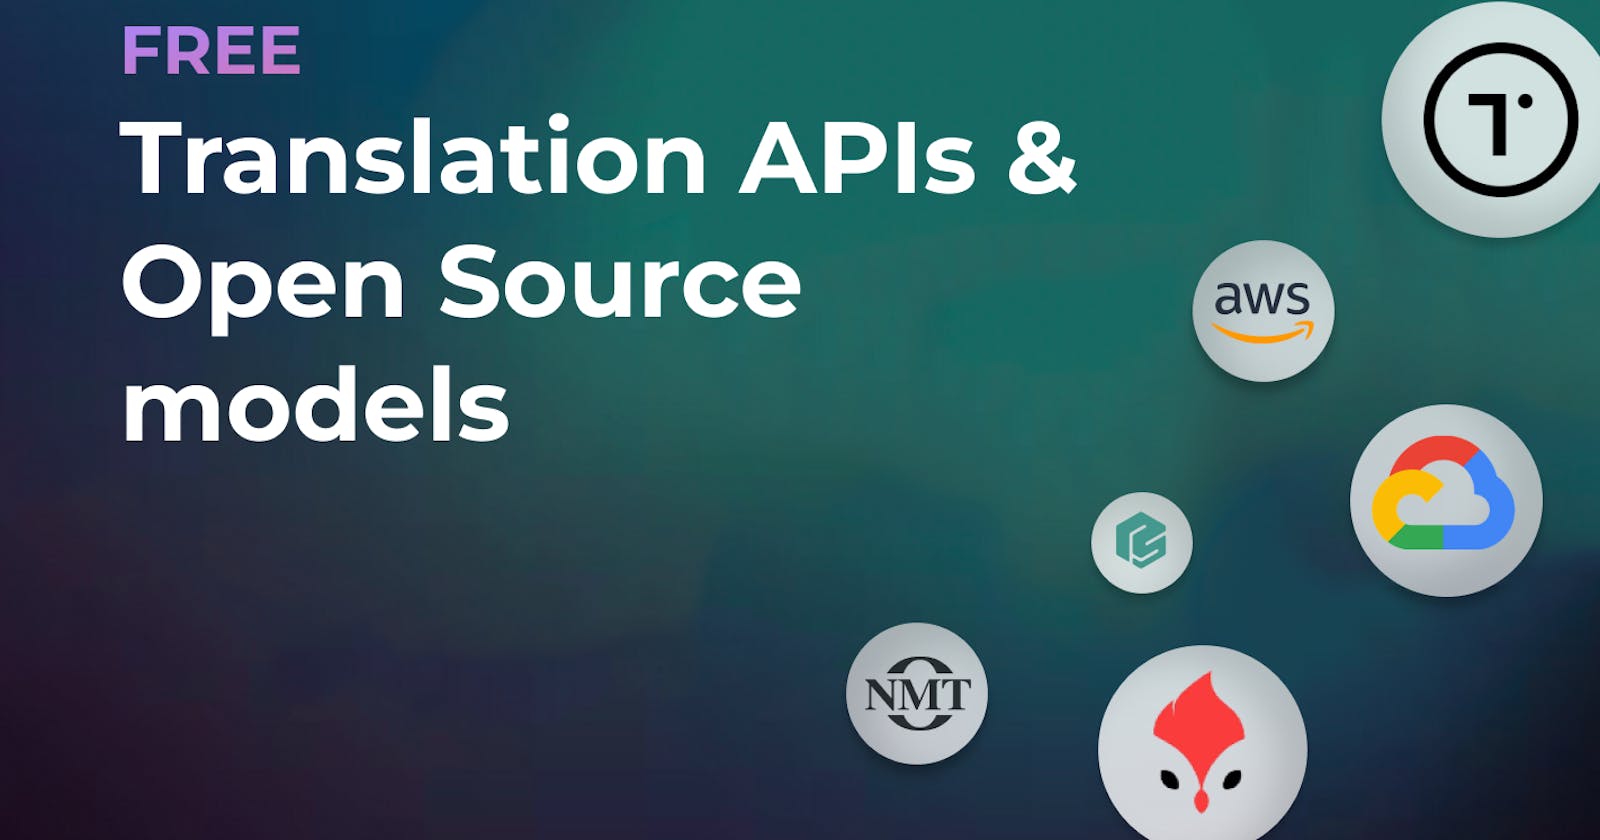 Top Free Translation tools, APIs, and Open Source models